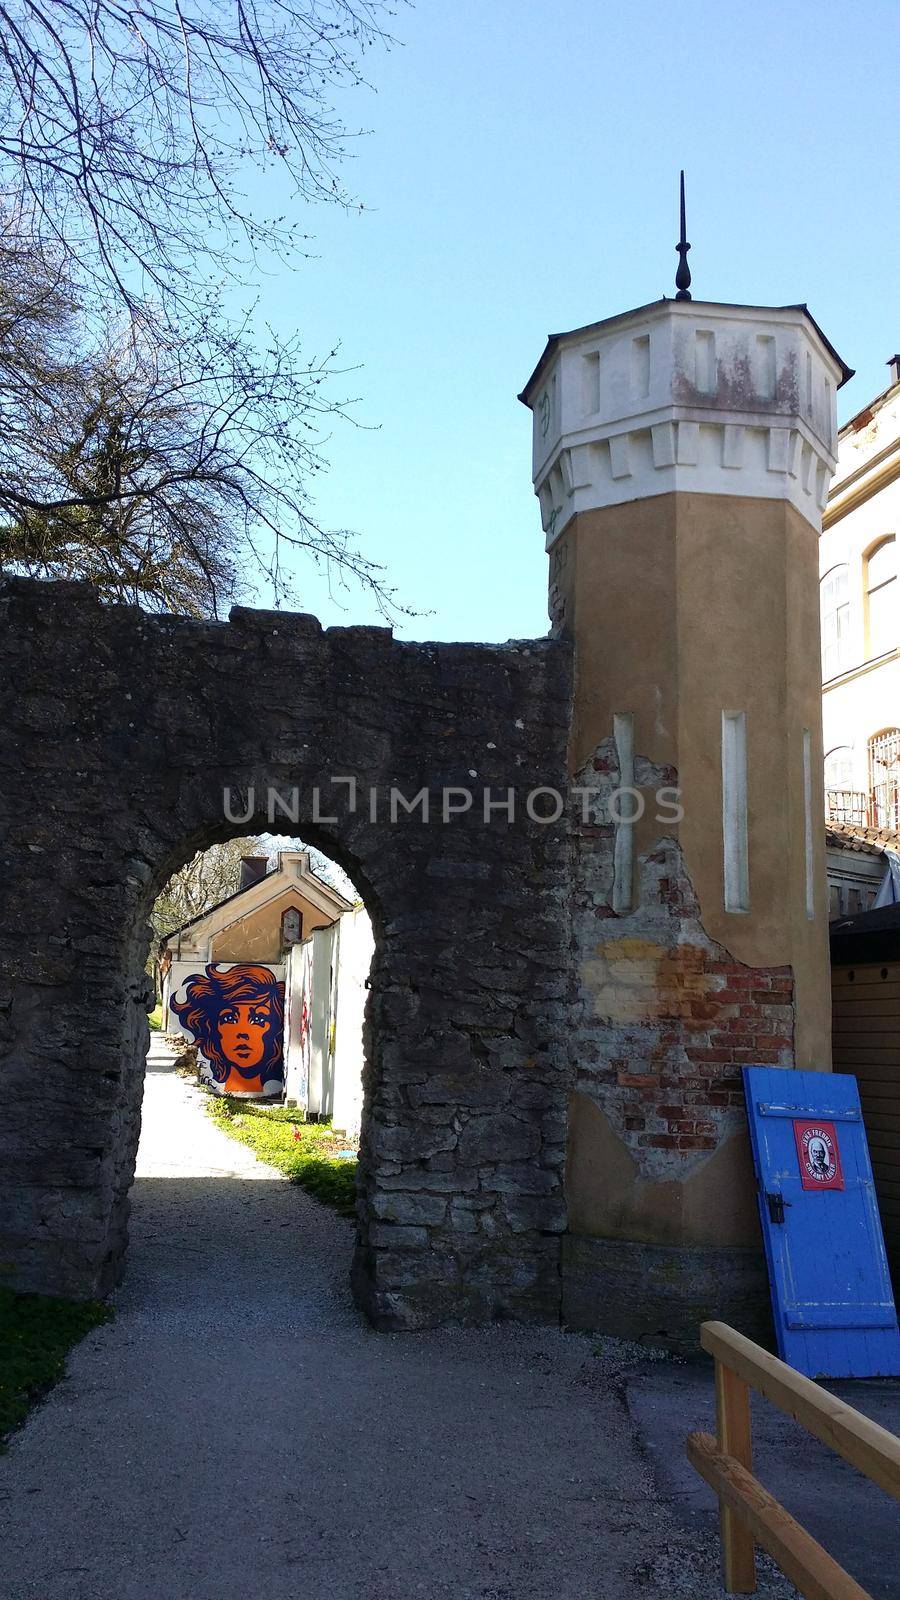 Visby, Sweden, May 5, 2019. A glimpse of the walls of the old town of Visby in Gotland in Sweden